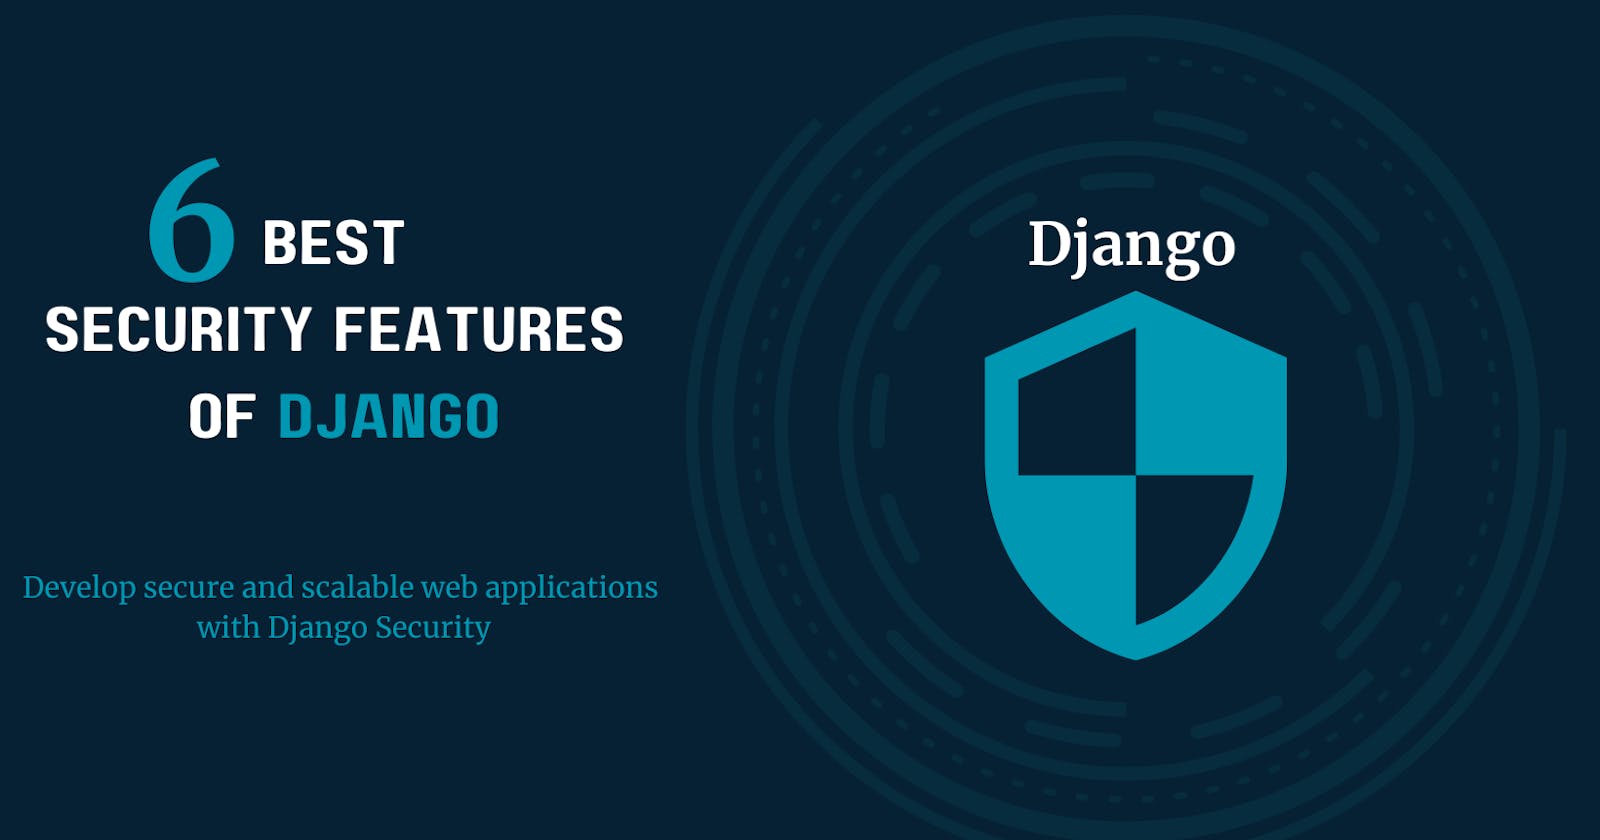 6 Best Security Features of Django for Building Secure Web Applications